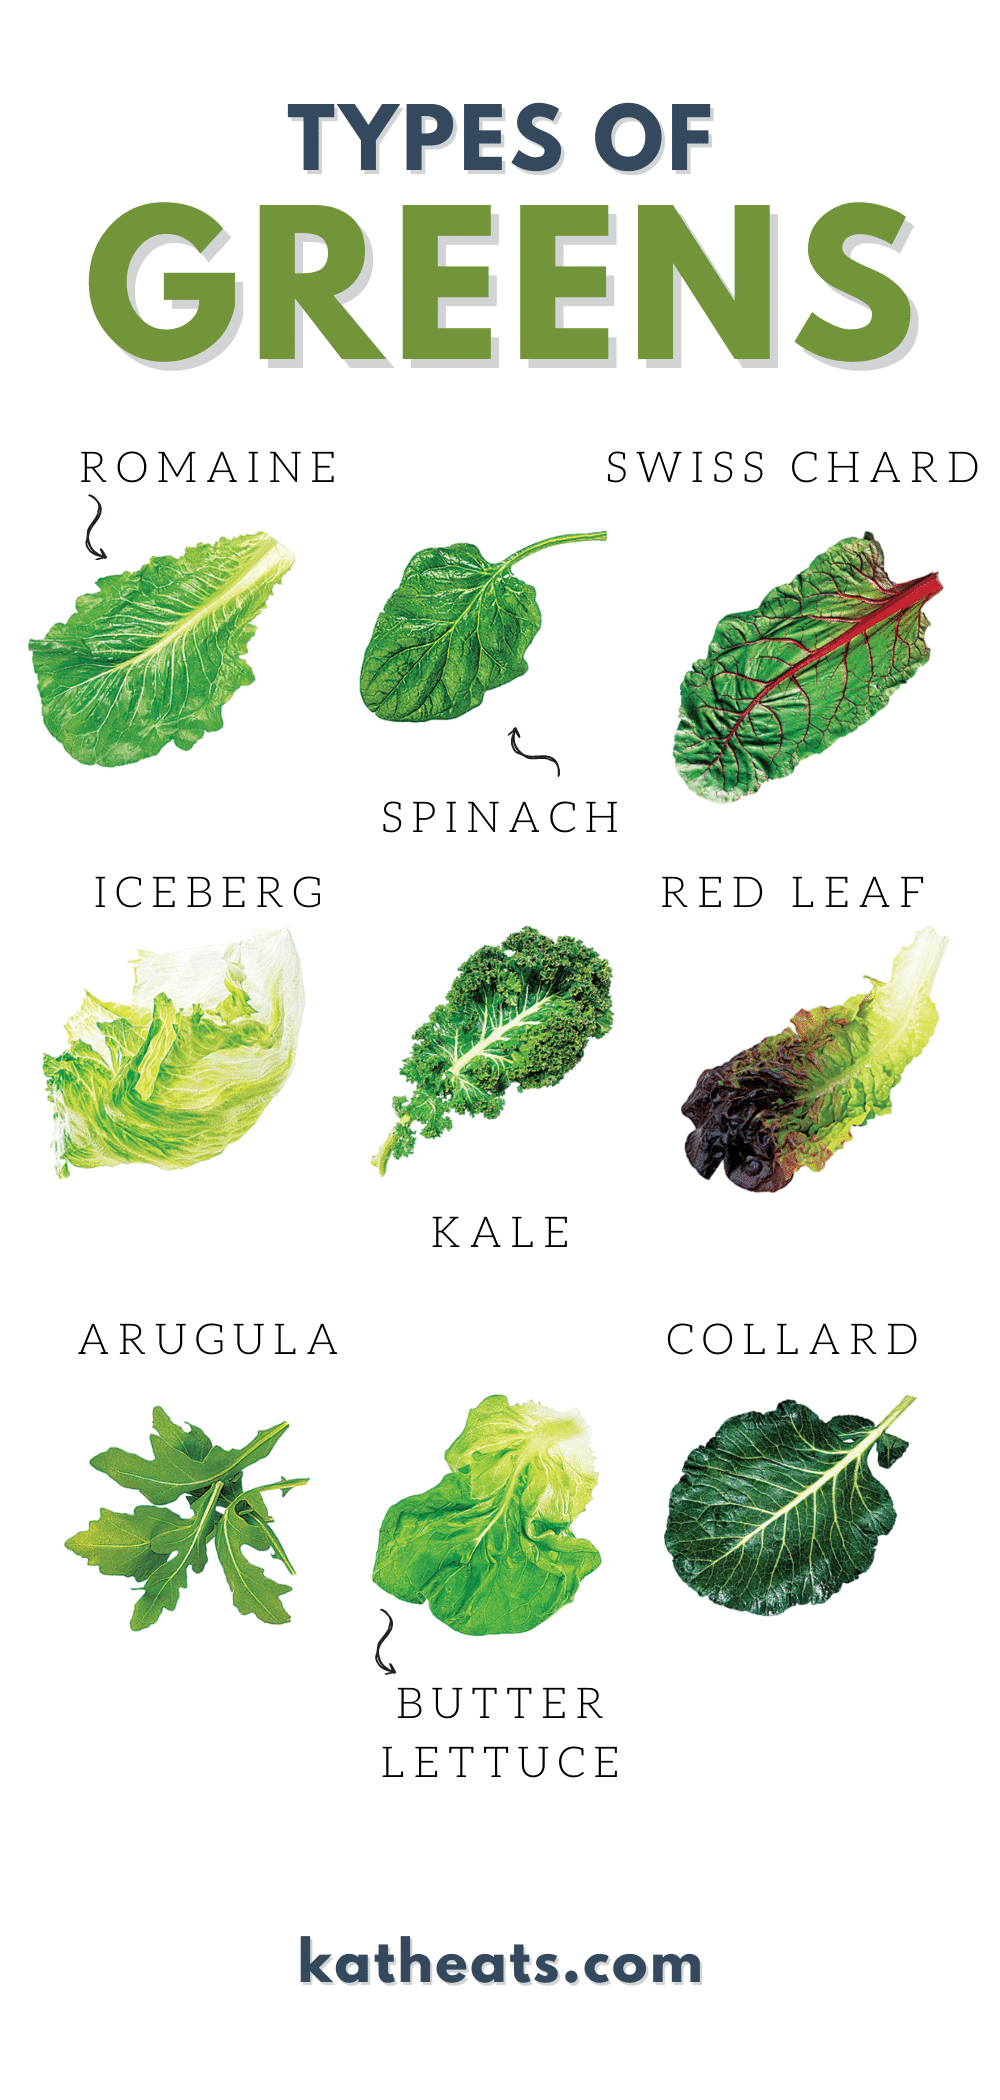 How To Wash & Store Greens - Types of greens